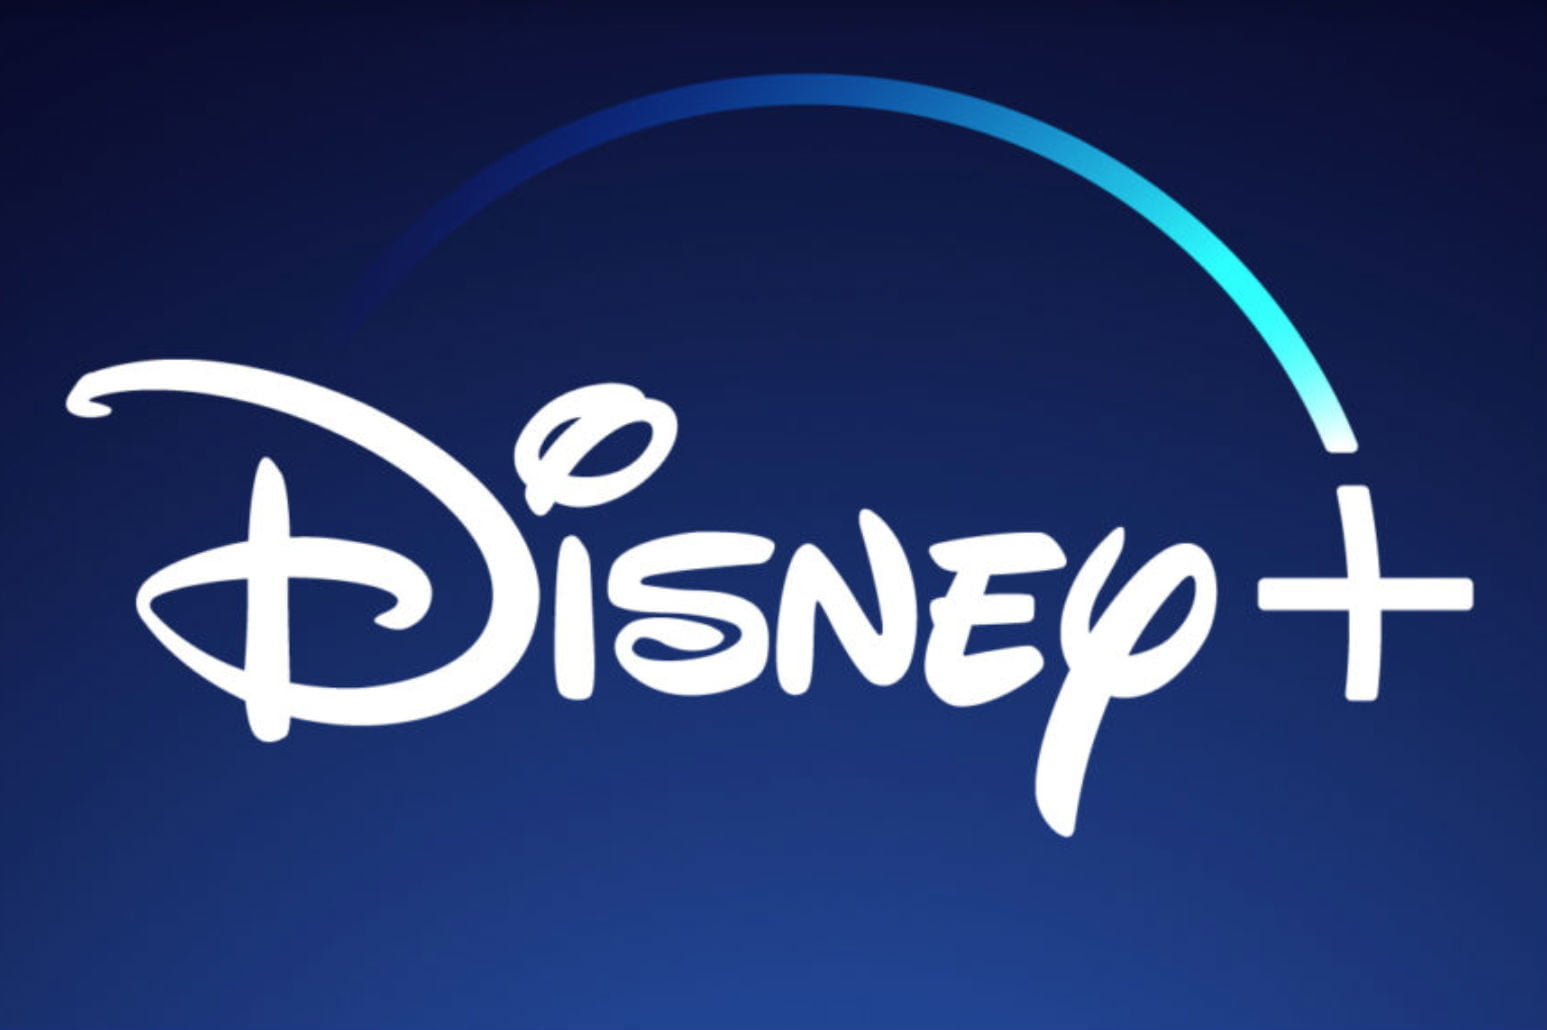 Free Disney+ for Up to 6 Months When You Pay for Amazon Music Unlimited